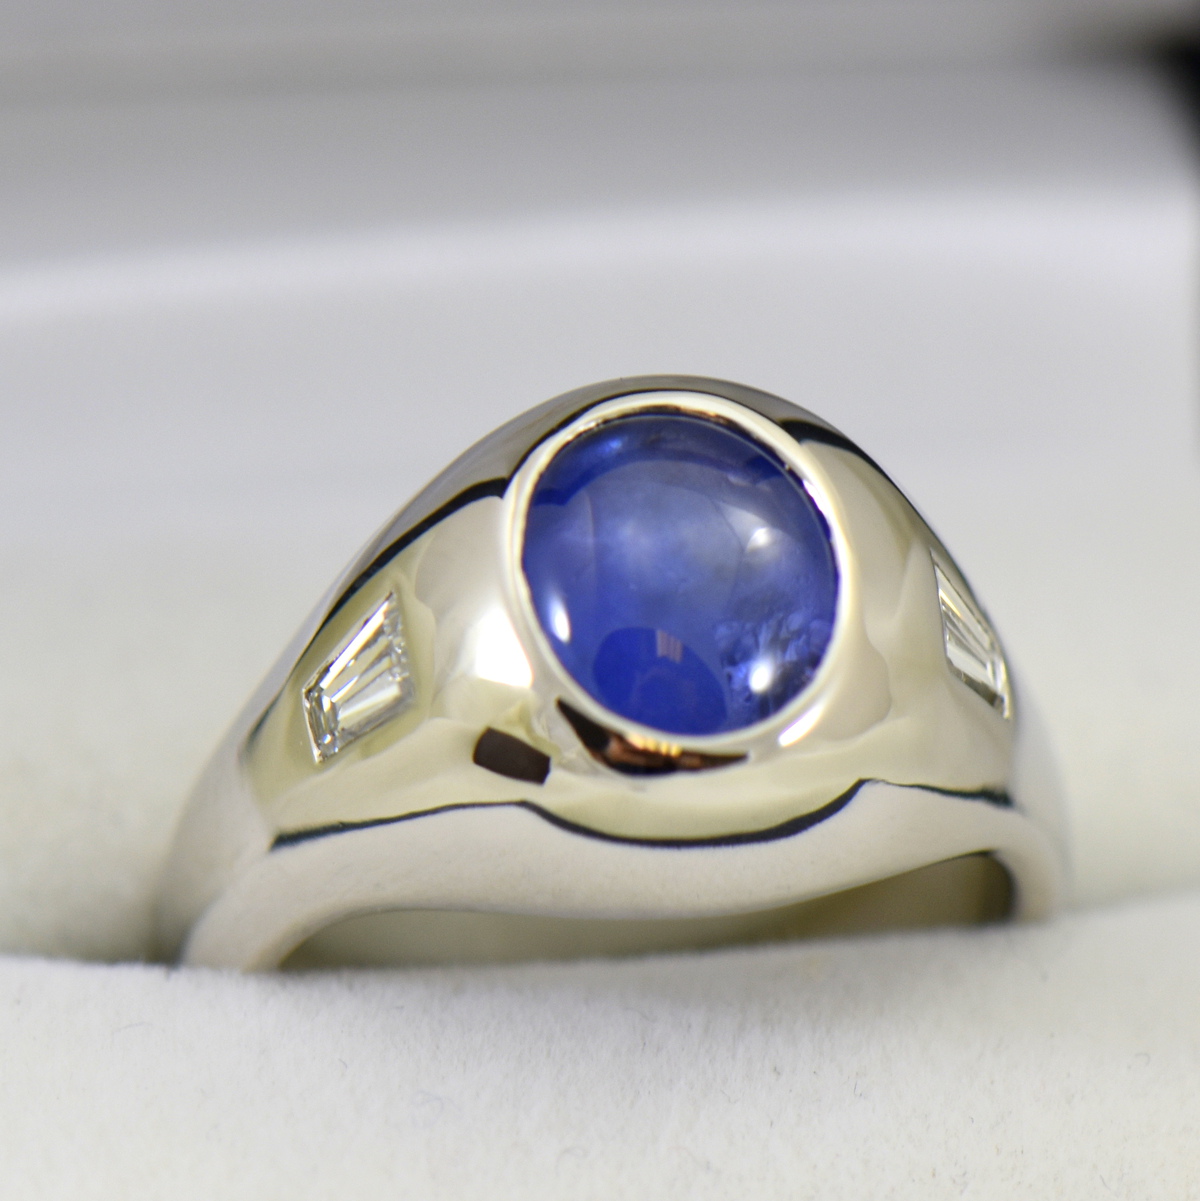 Buy Vintage Blue Star Sapphire 2.63 Carat Ring 14k White Gold Online |  Arnold Jewelers